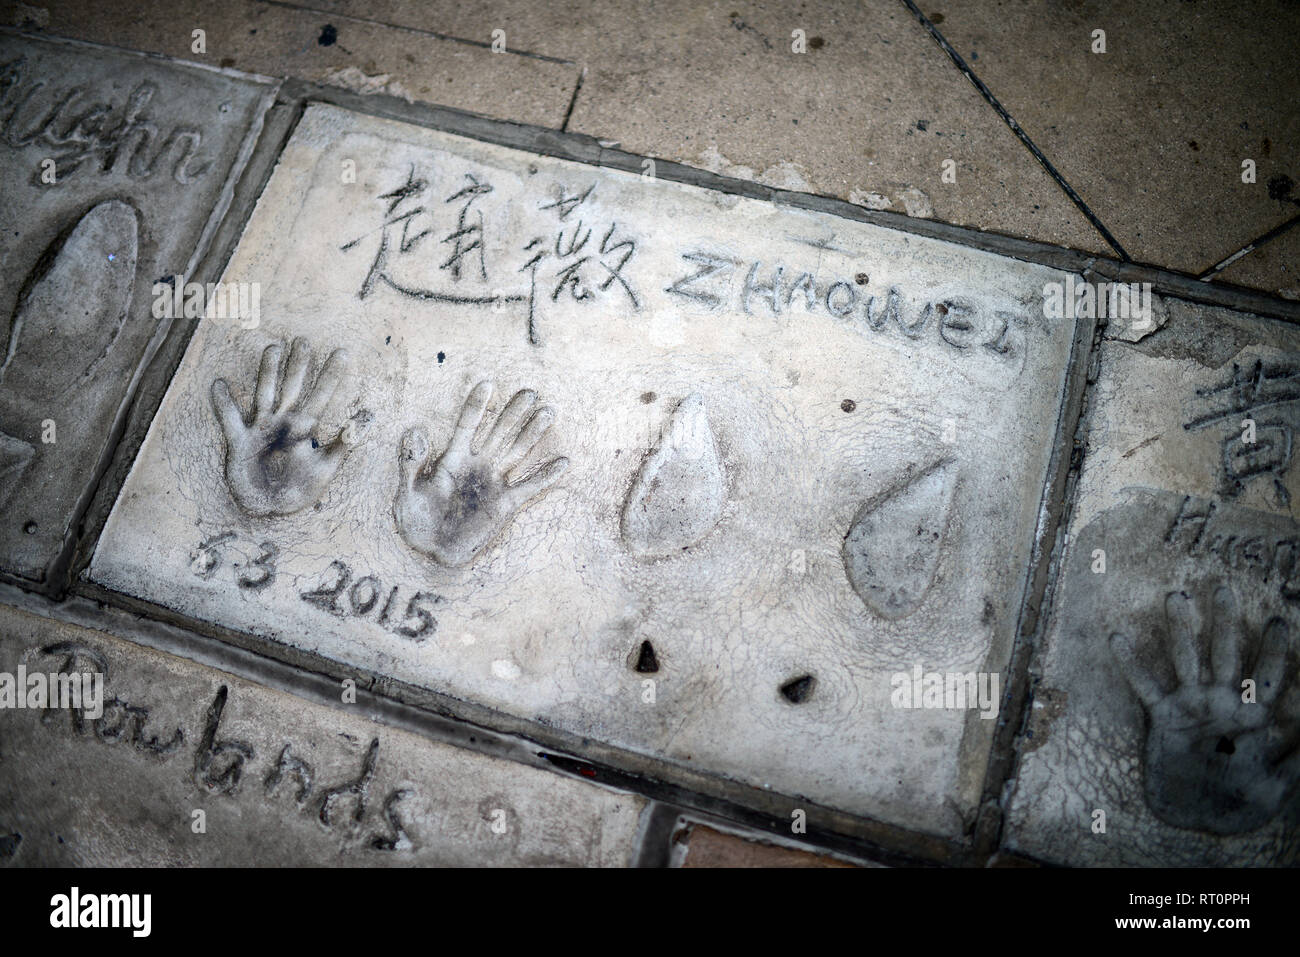 Prints in Grauman's Chinese Theatre, Hollywood Boulevard. Stock Photo